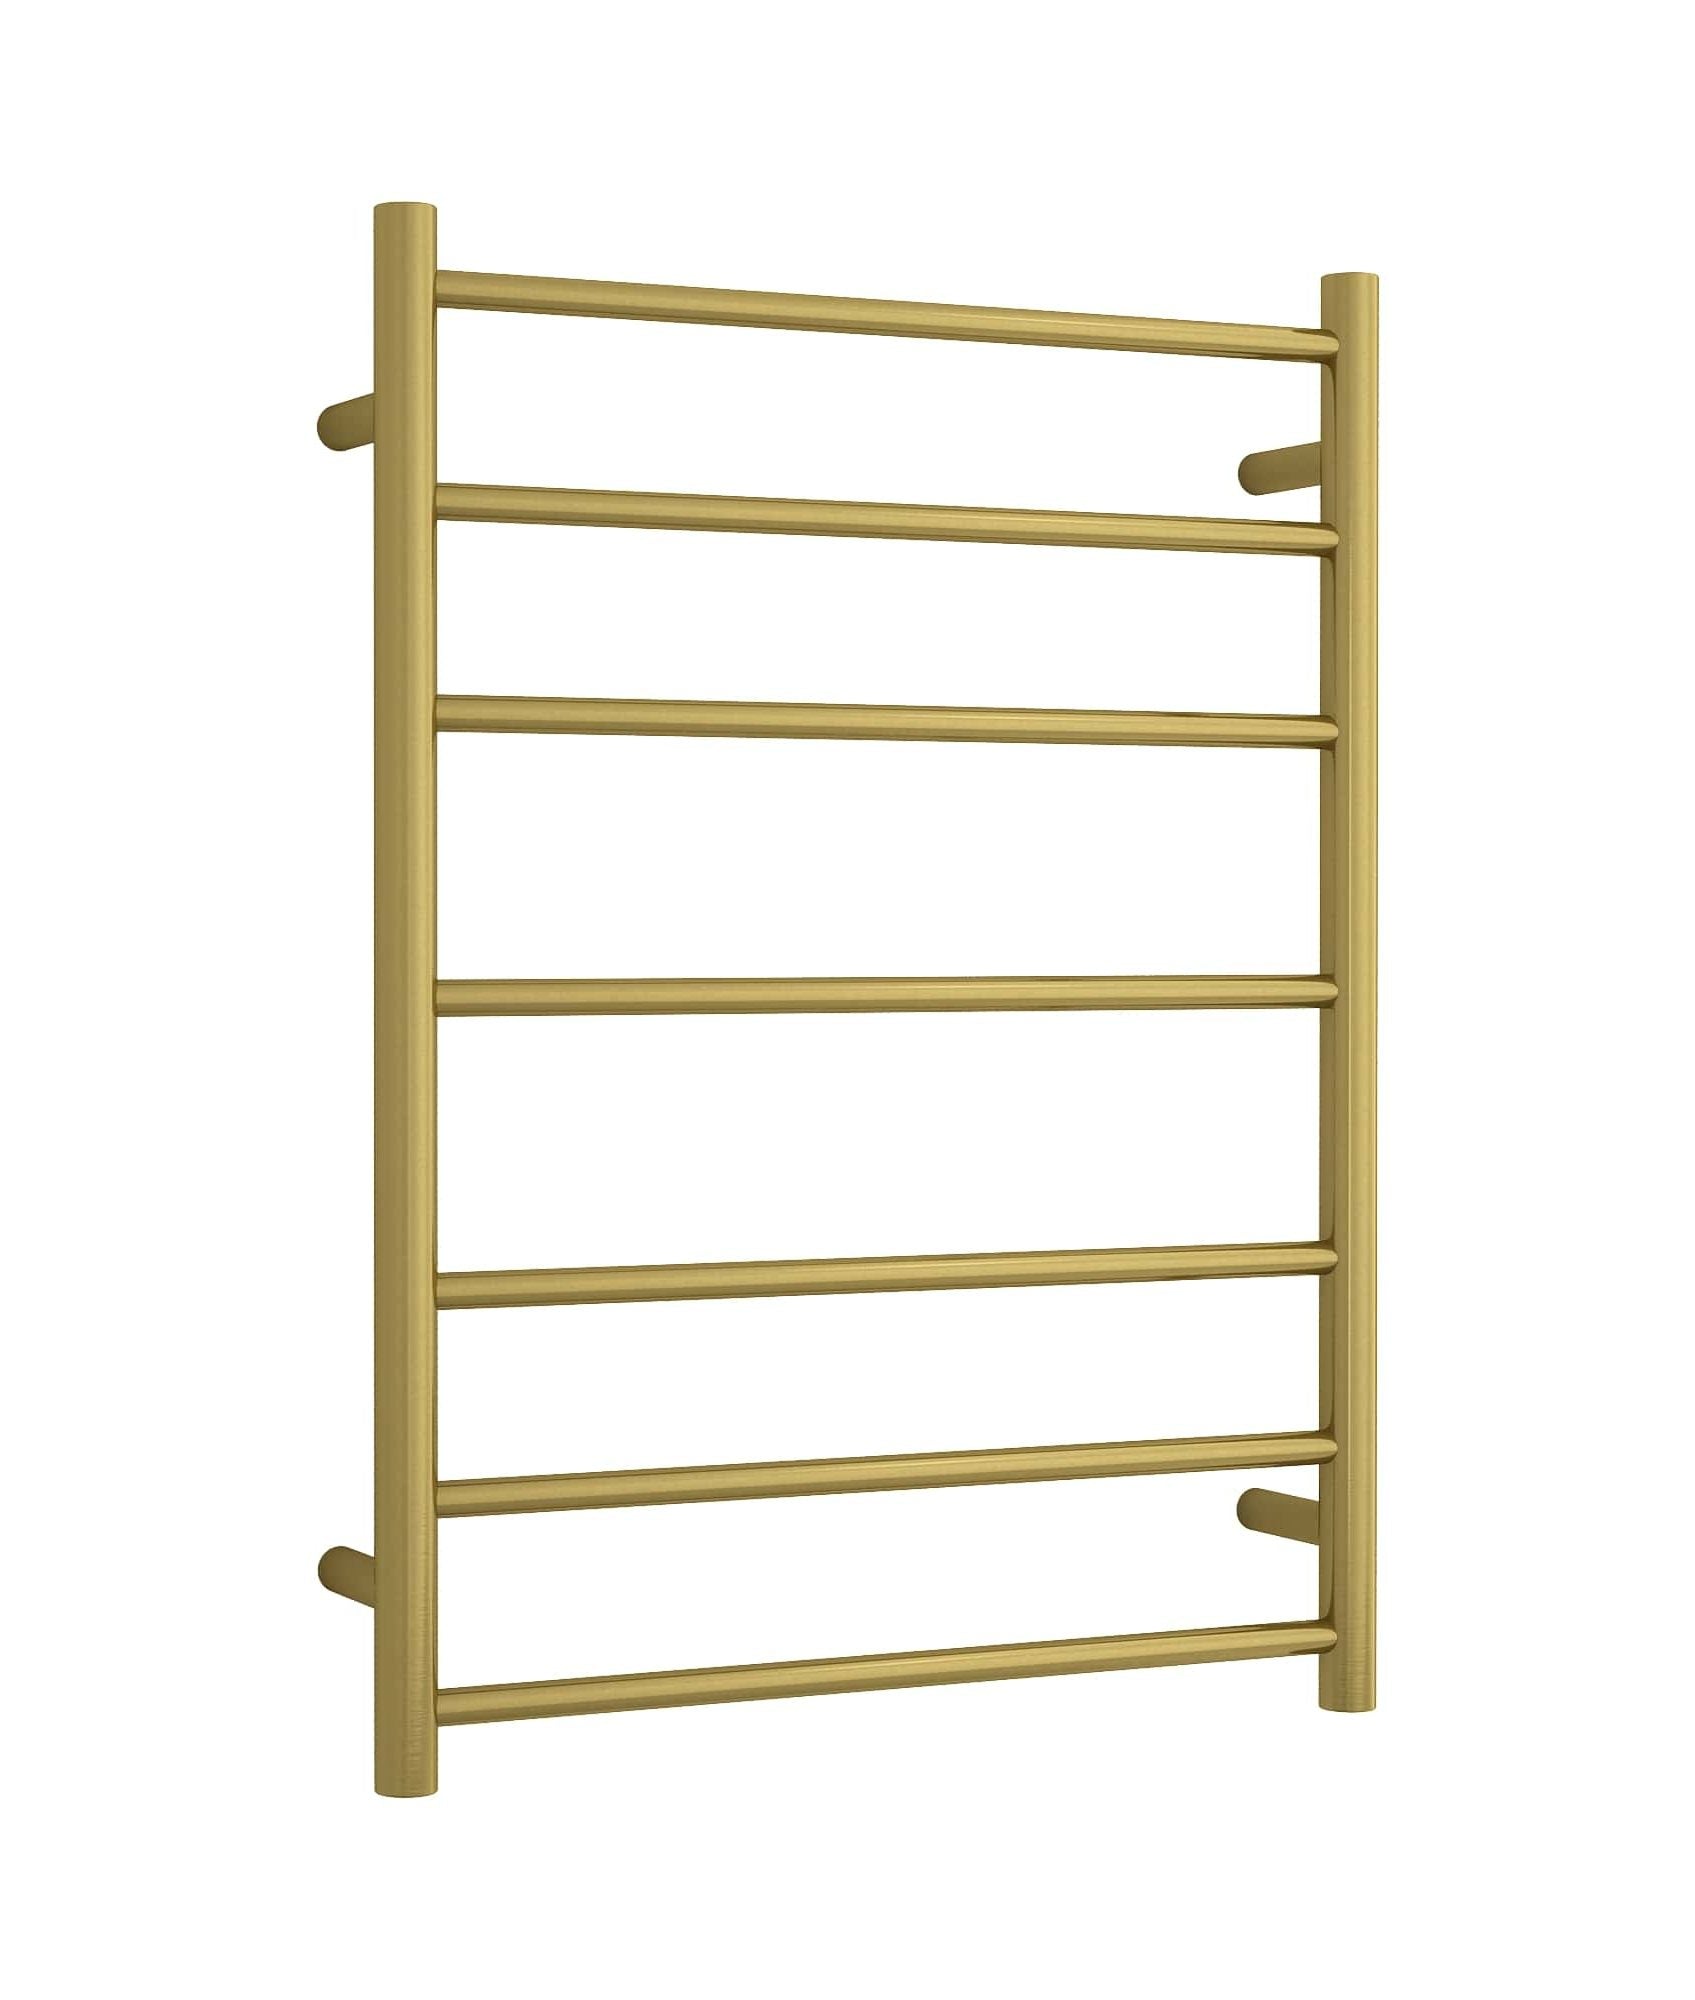 THERMOGROUP BRUSHED GOLD ROUND LADDER HEATED TOWEL RAIL 800MM